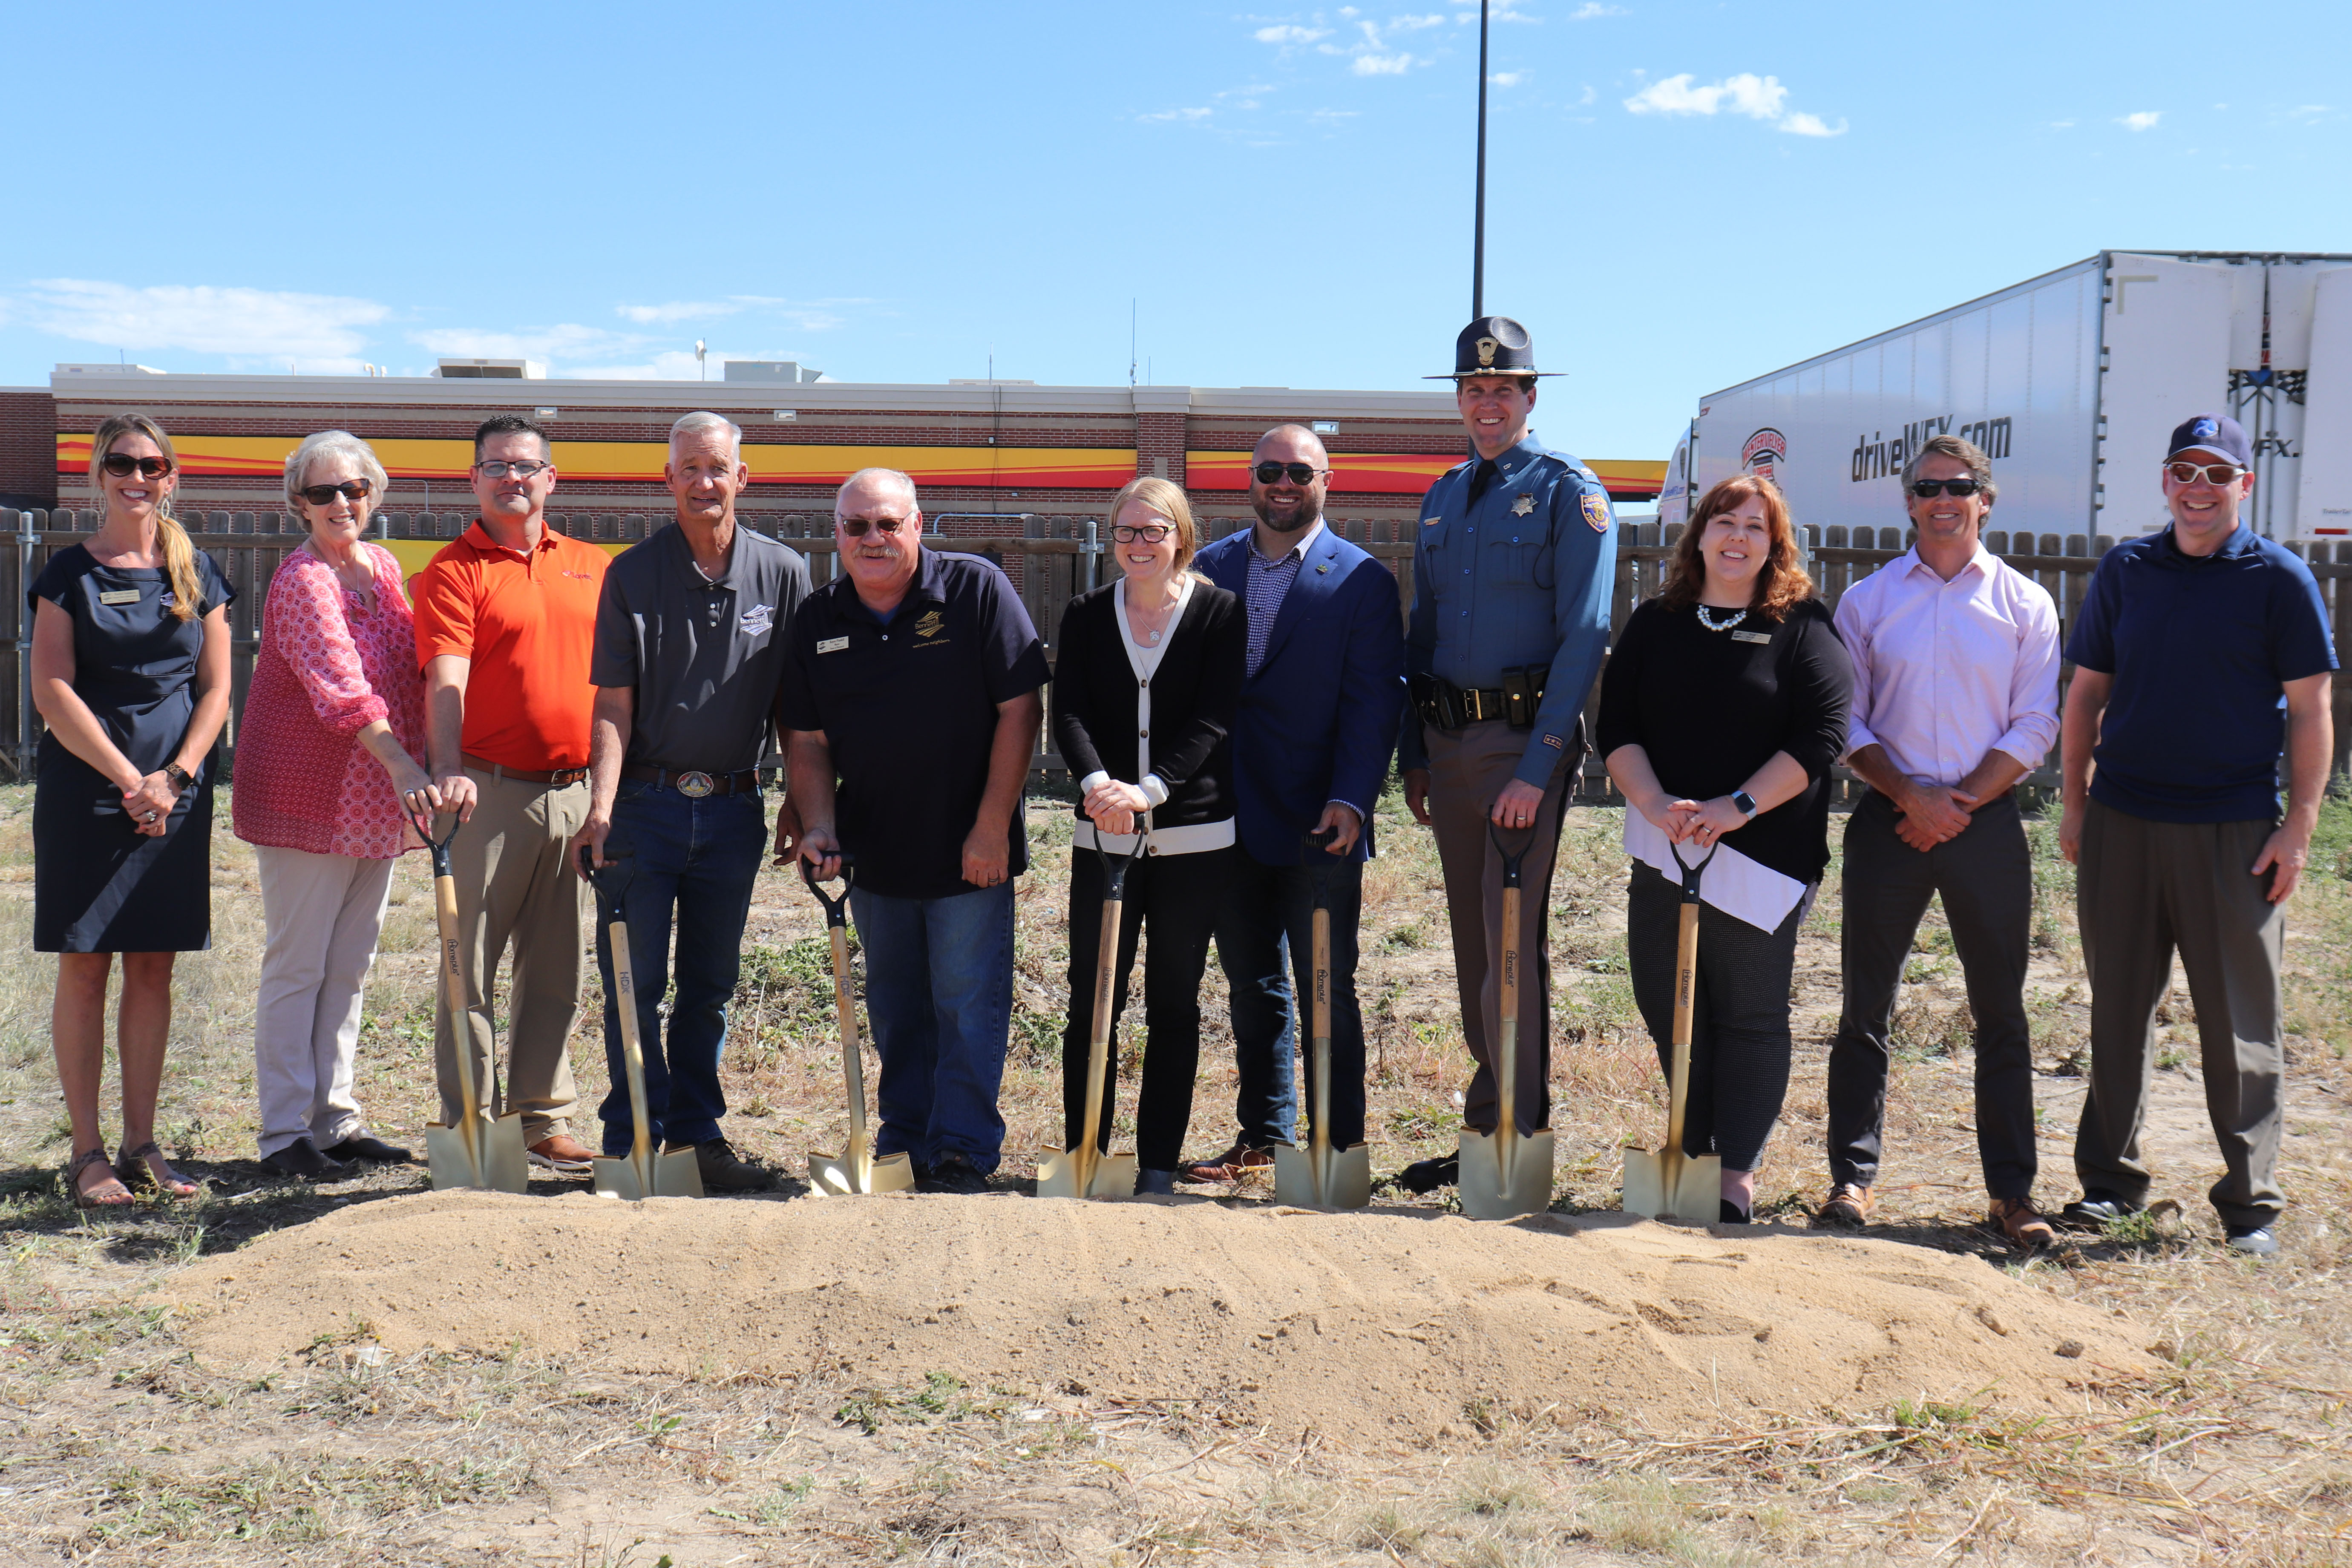 Loves Groundbreaking in Bennett Colorado with Director Lew detail image